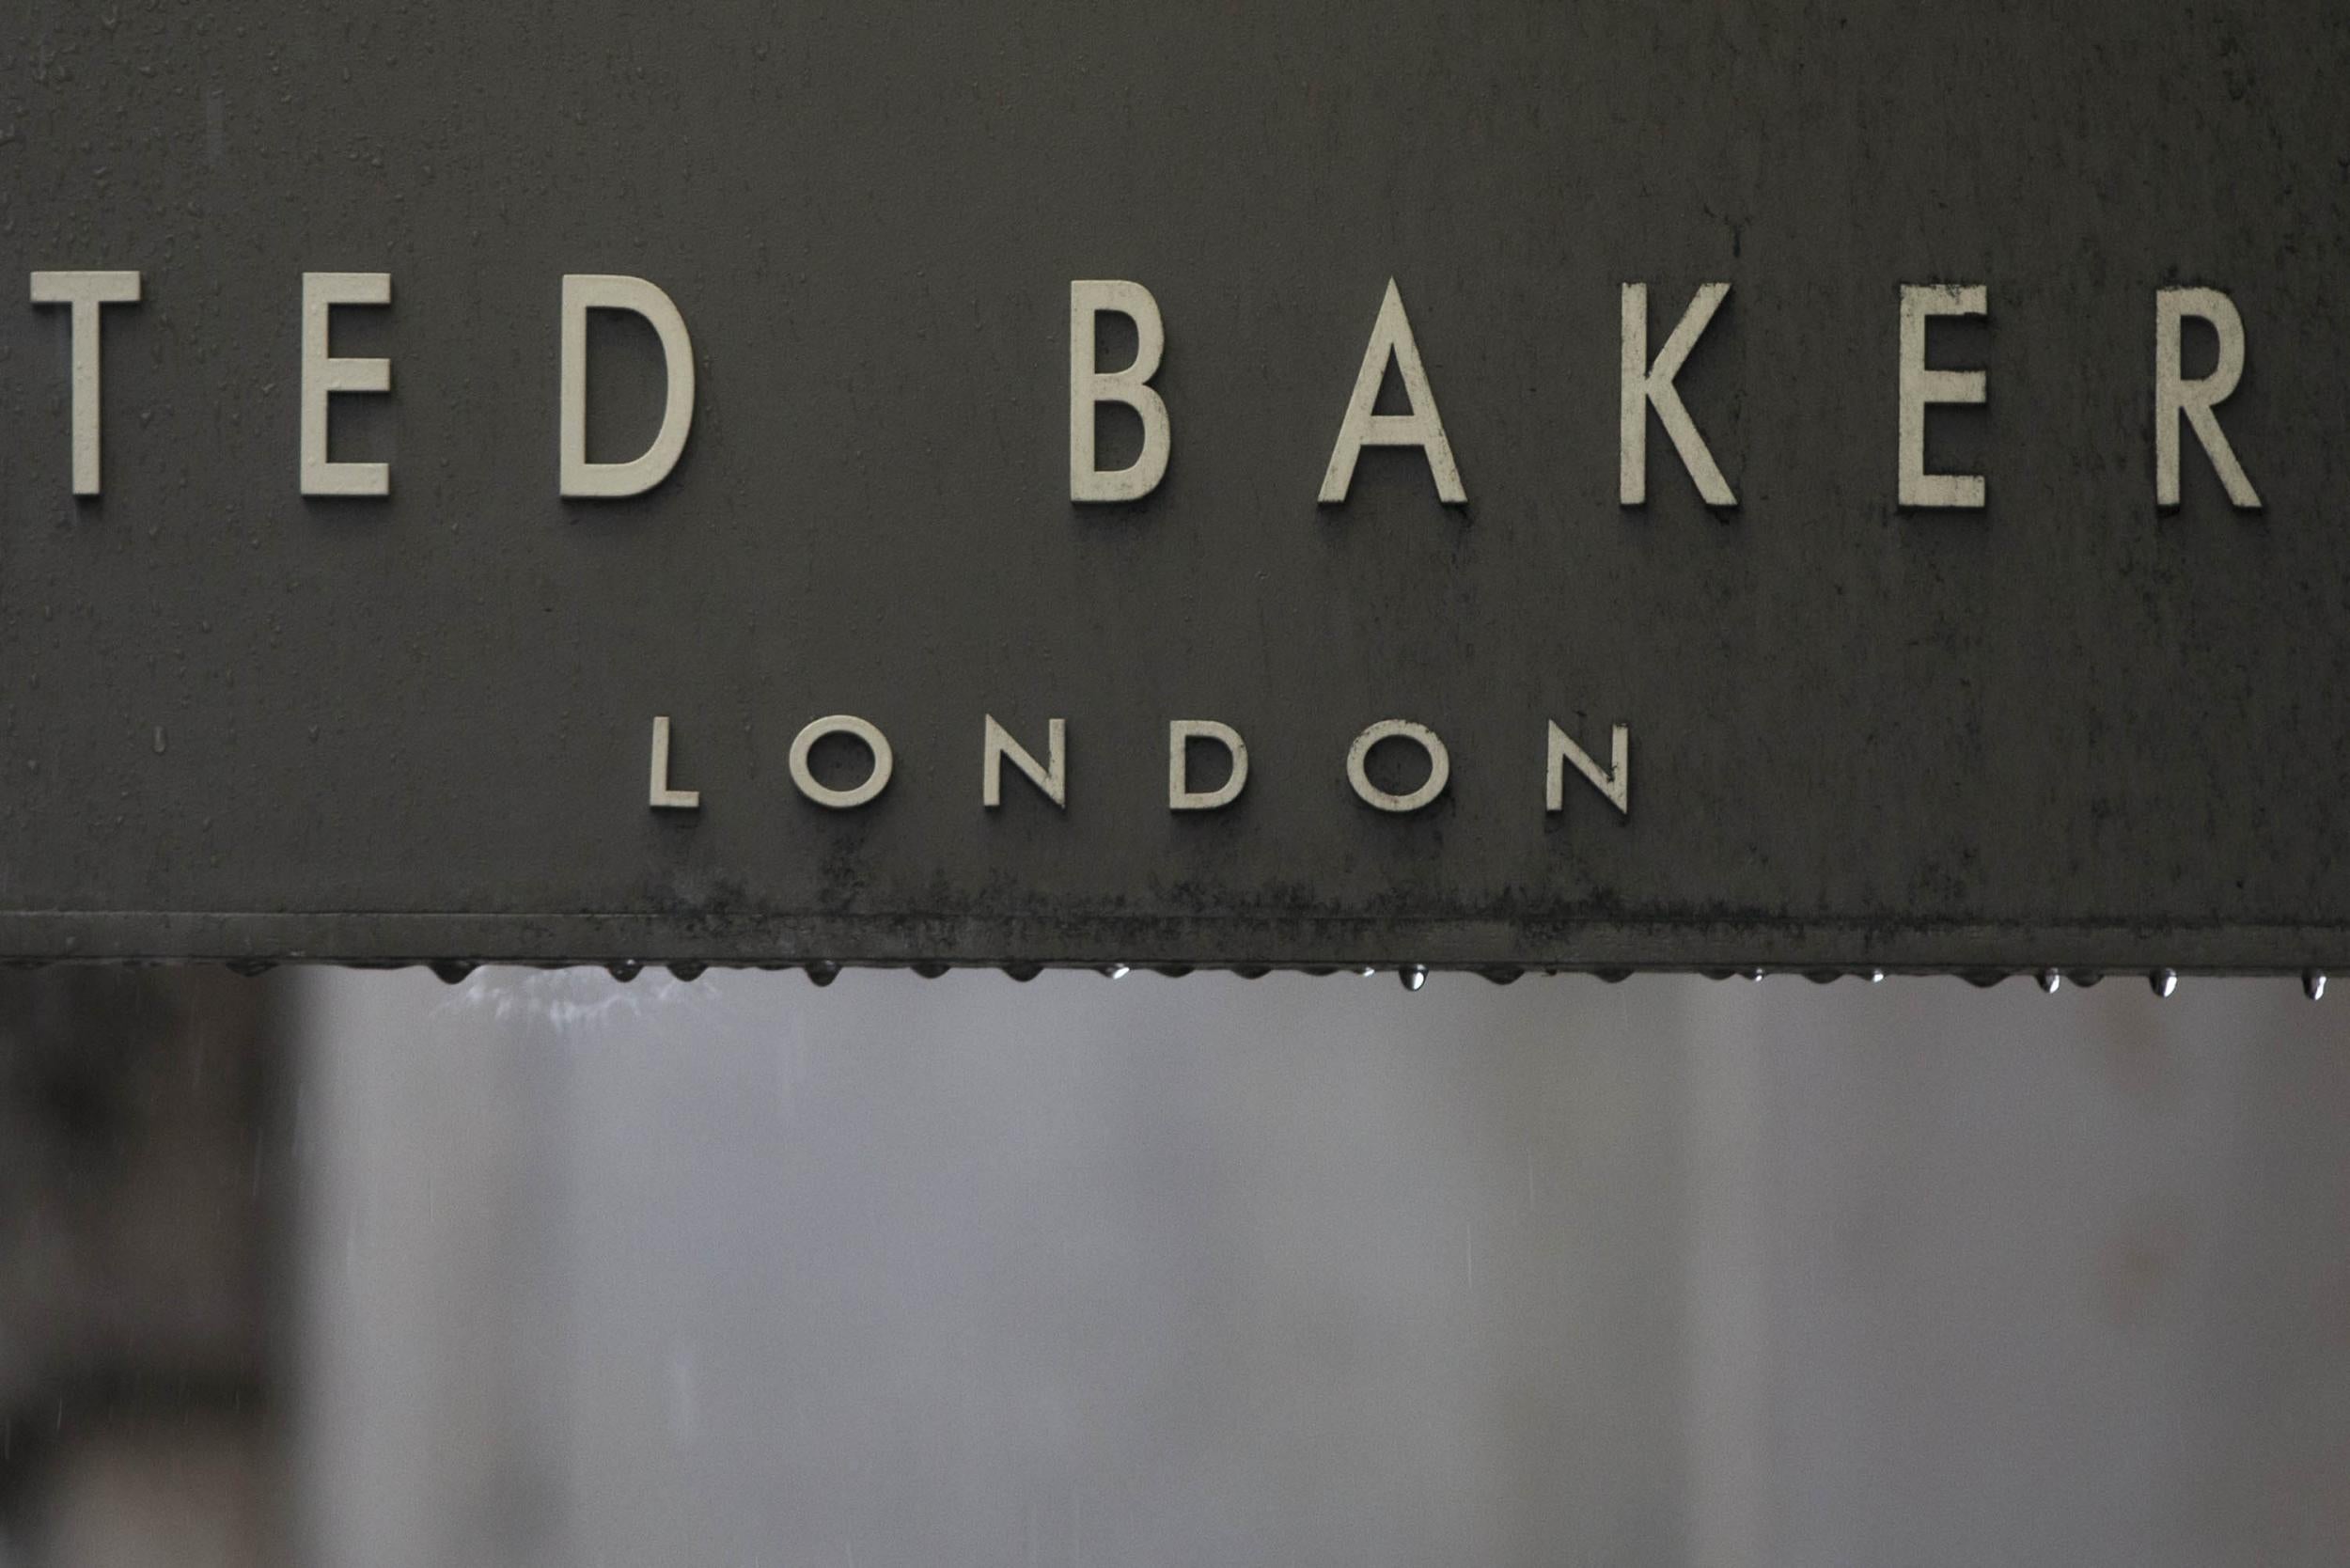 Ted Baker's board appointed lawyers to investigate Mr Kelvin's conduct